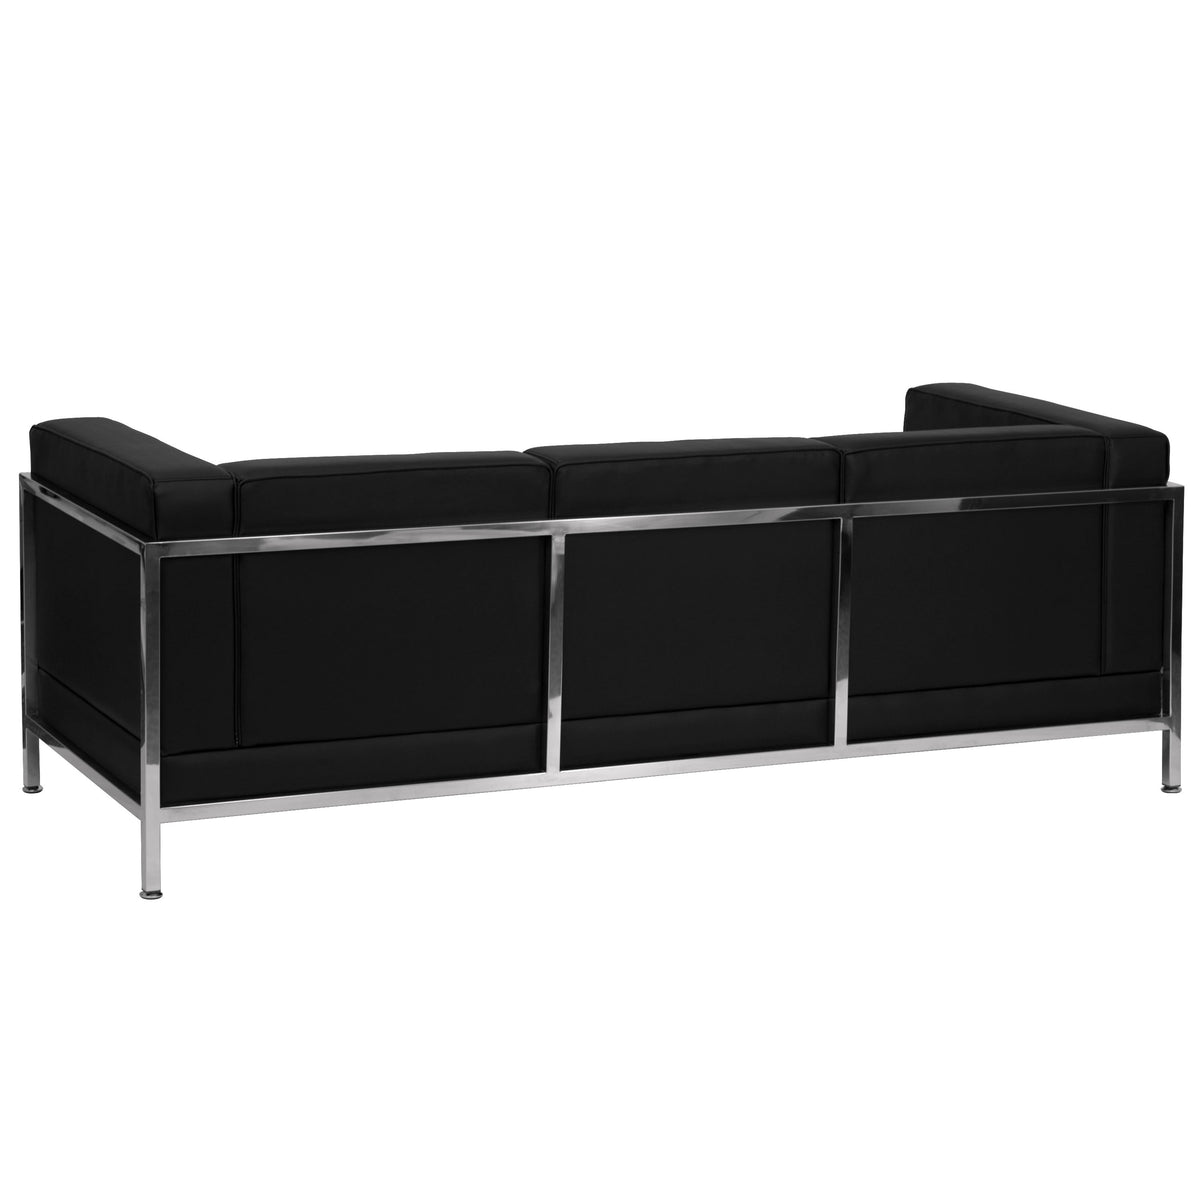 Black |#| Black LeatherSoft Modular Sofa with Quilted Tufted Seat and Encasing Frame